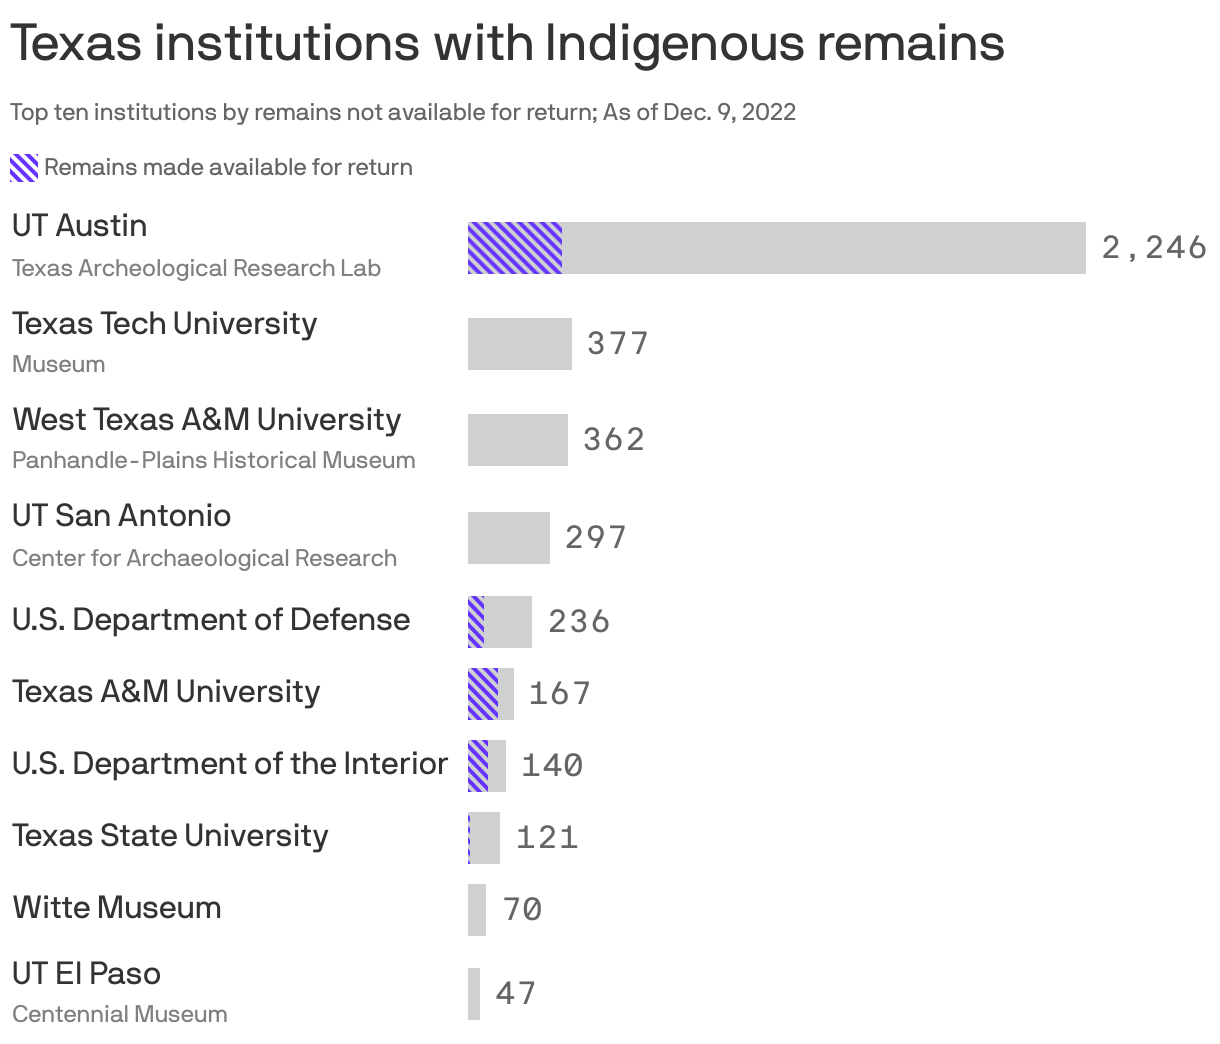 Texas institutions with Indigenous remains